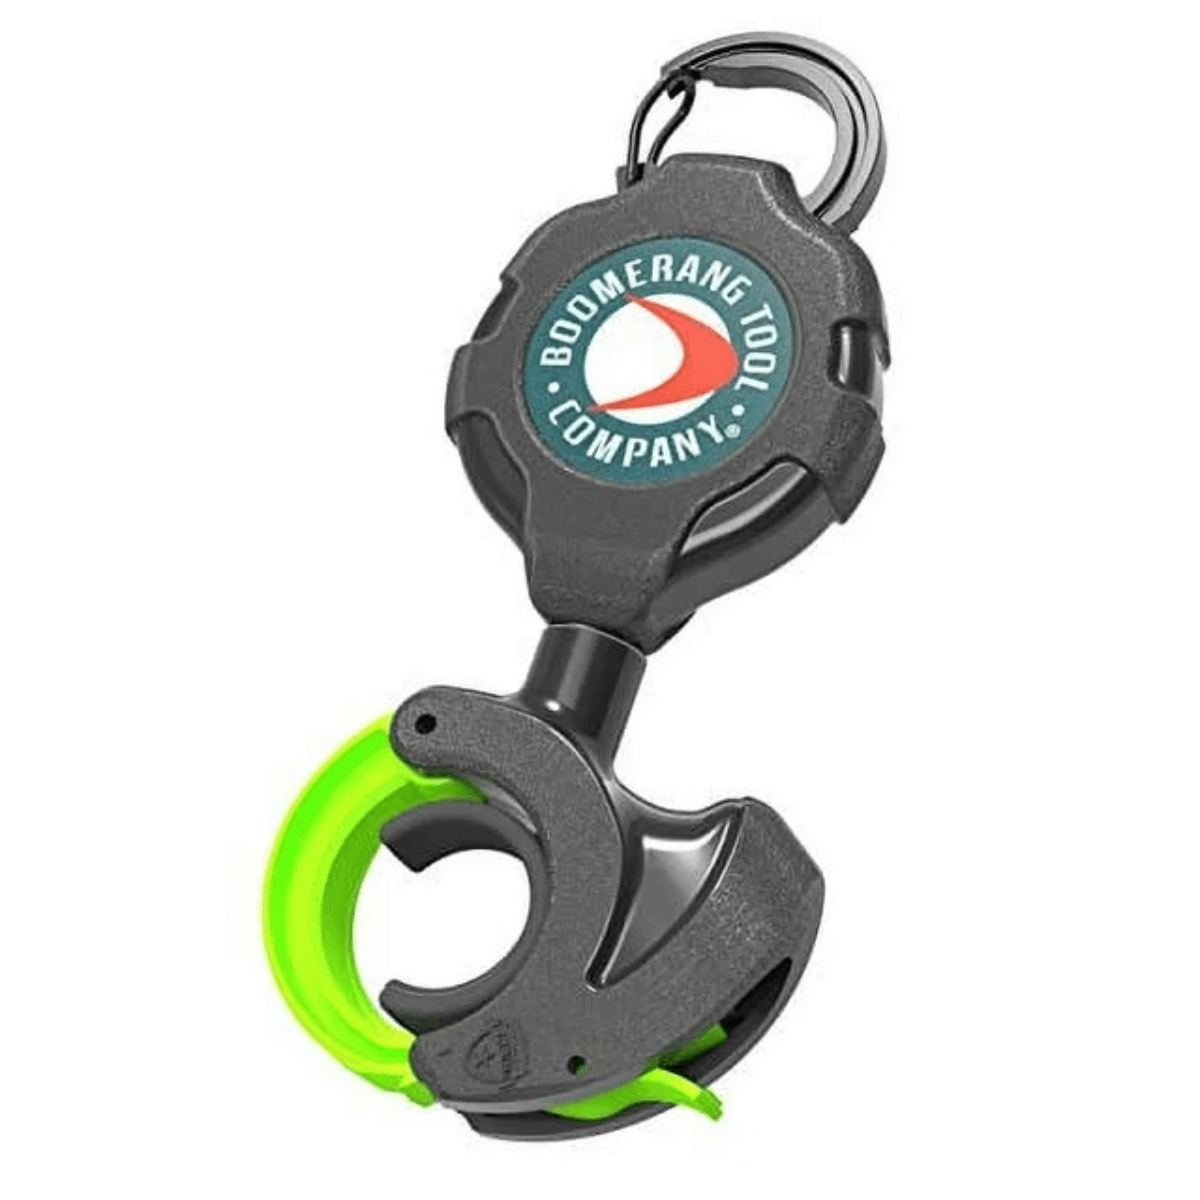 ProGrip Retractable Kayak Paddle Leash Tether for Fishing Rods